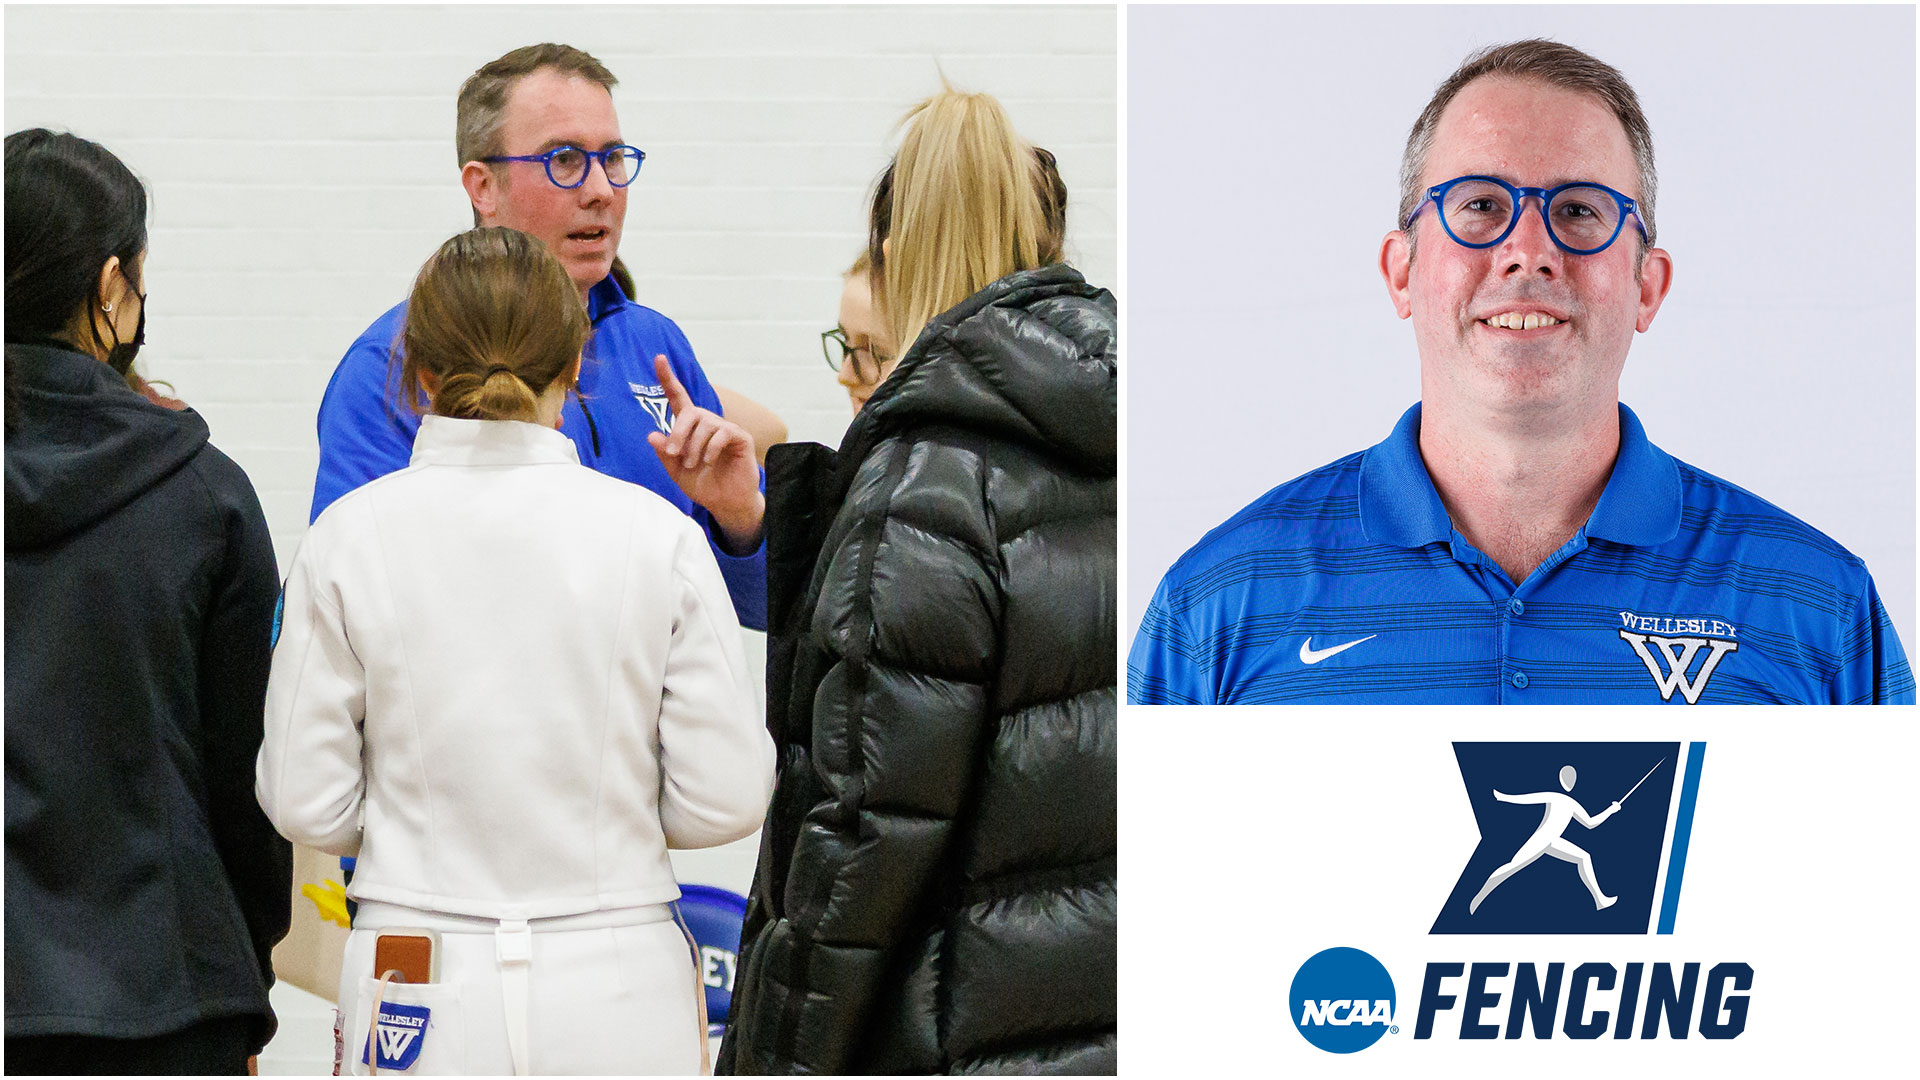 Wellesley Head Coach Rob Charlton Appointed to NCAA Fencing Committee